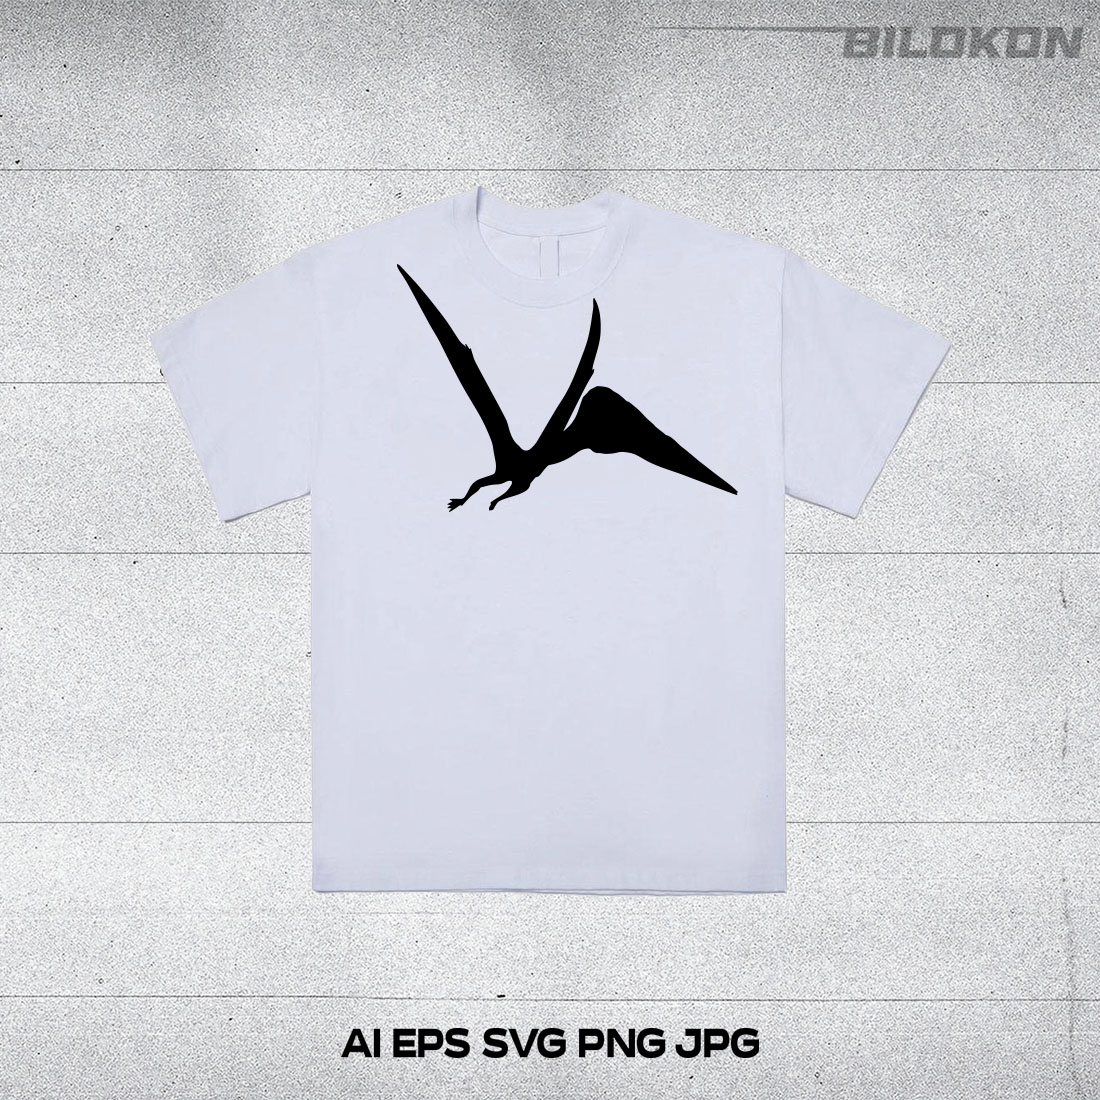 White t - shirt with a black bird on it.